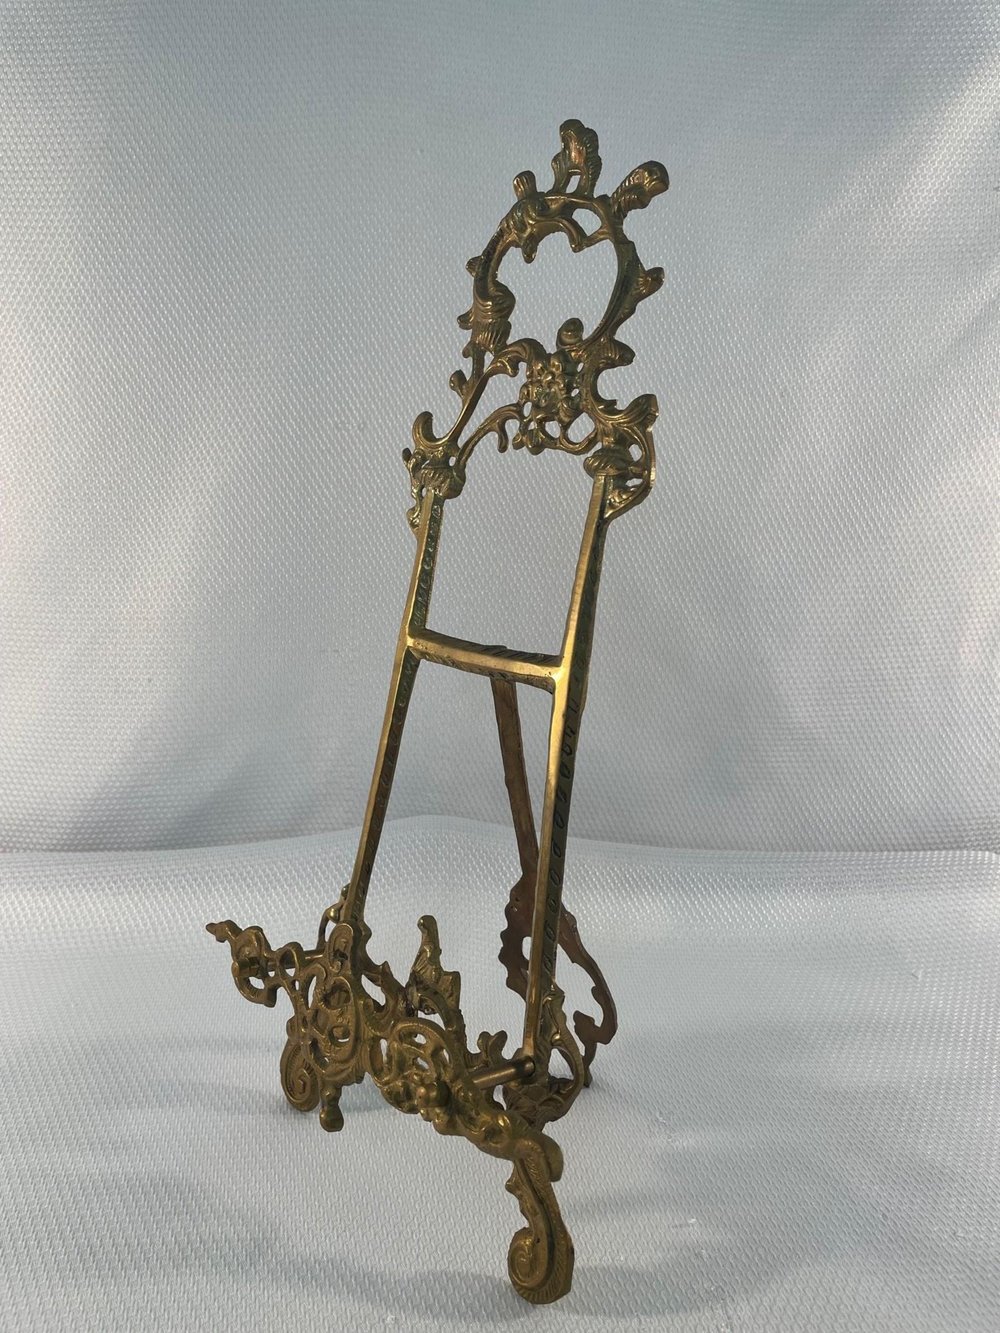 Victorian Style Ornate Cast Brass Display Easel – Bucks County Estate  Traders